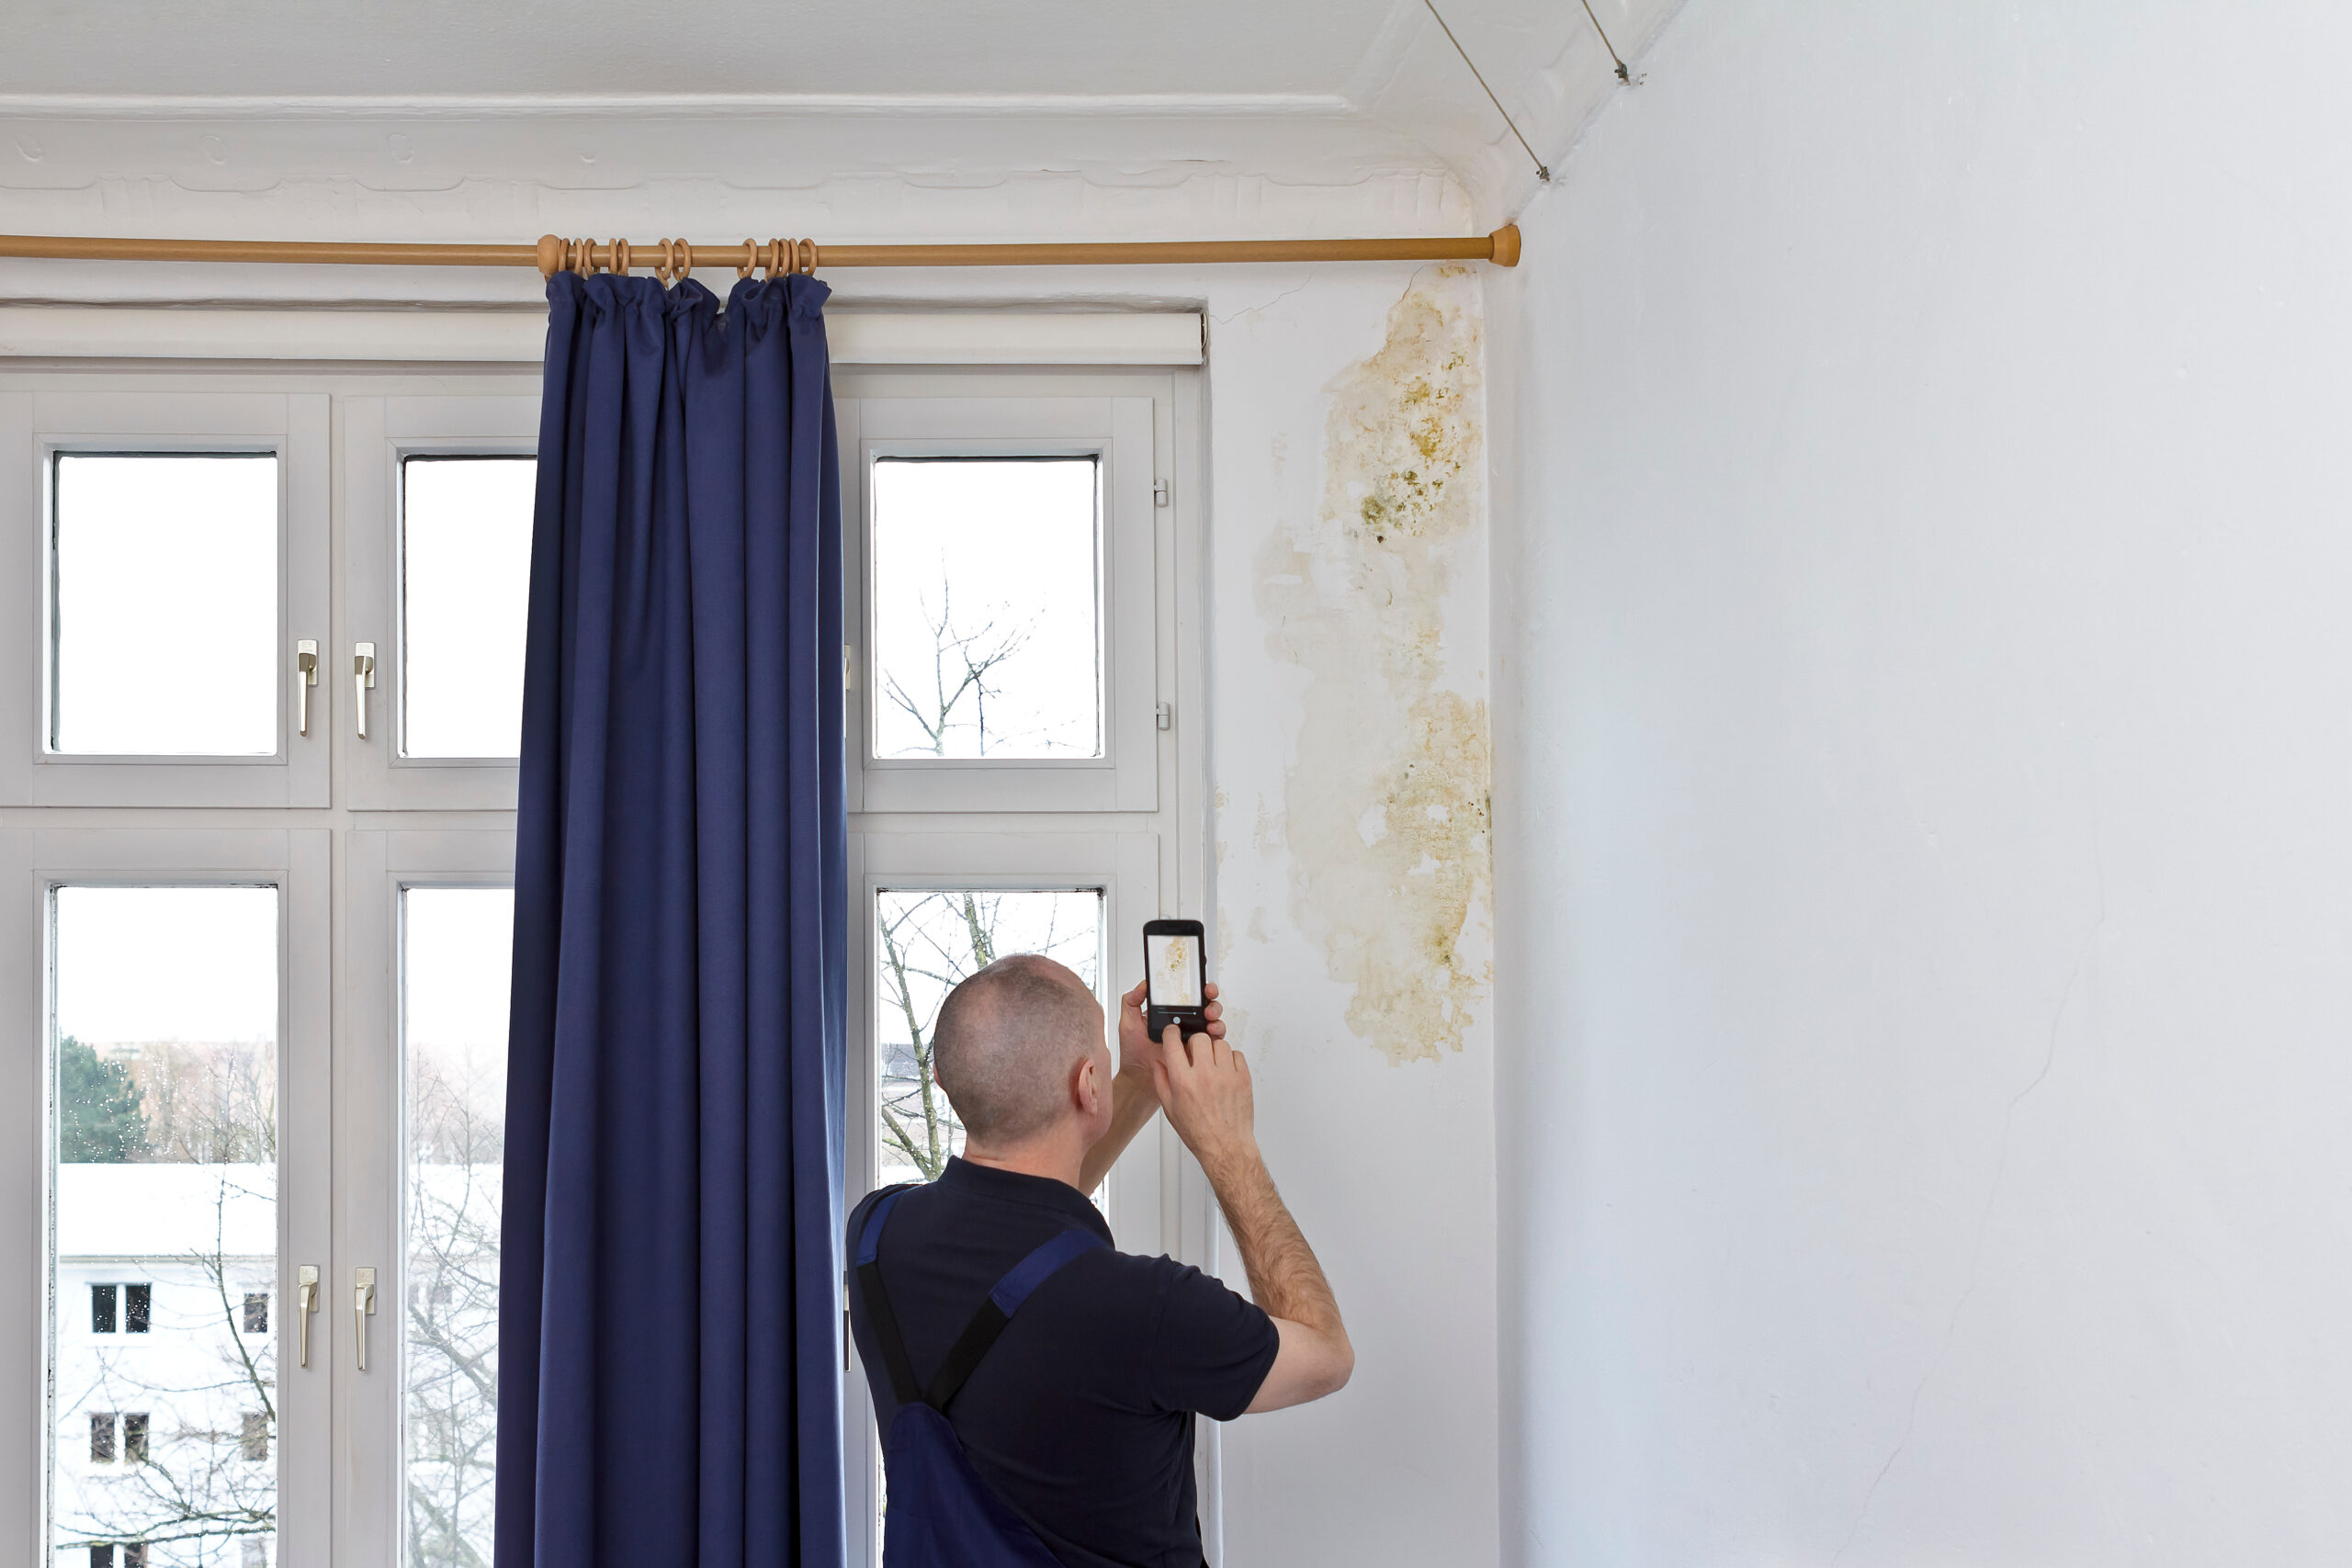 Common Causes of Mold Growth in Homes and Businesses